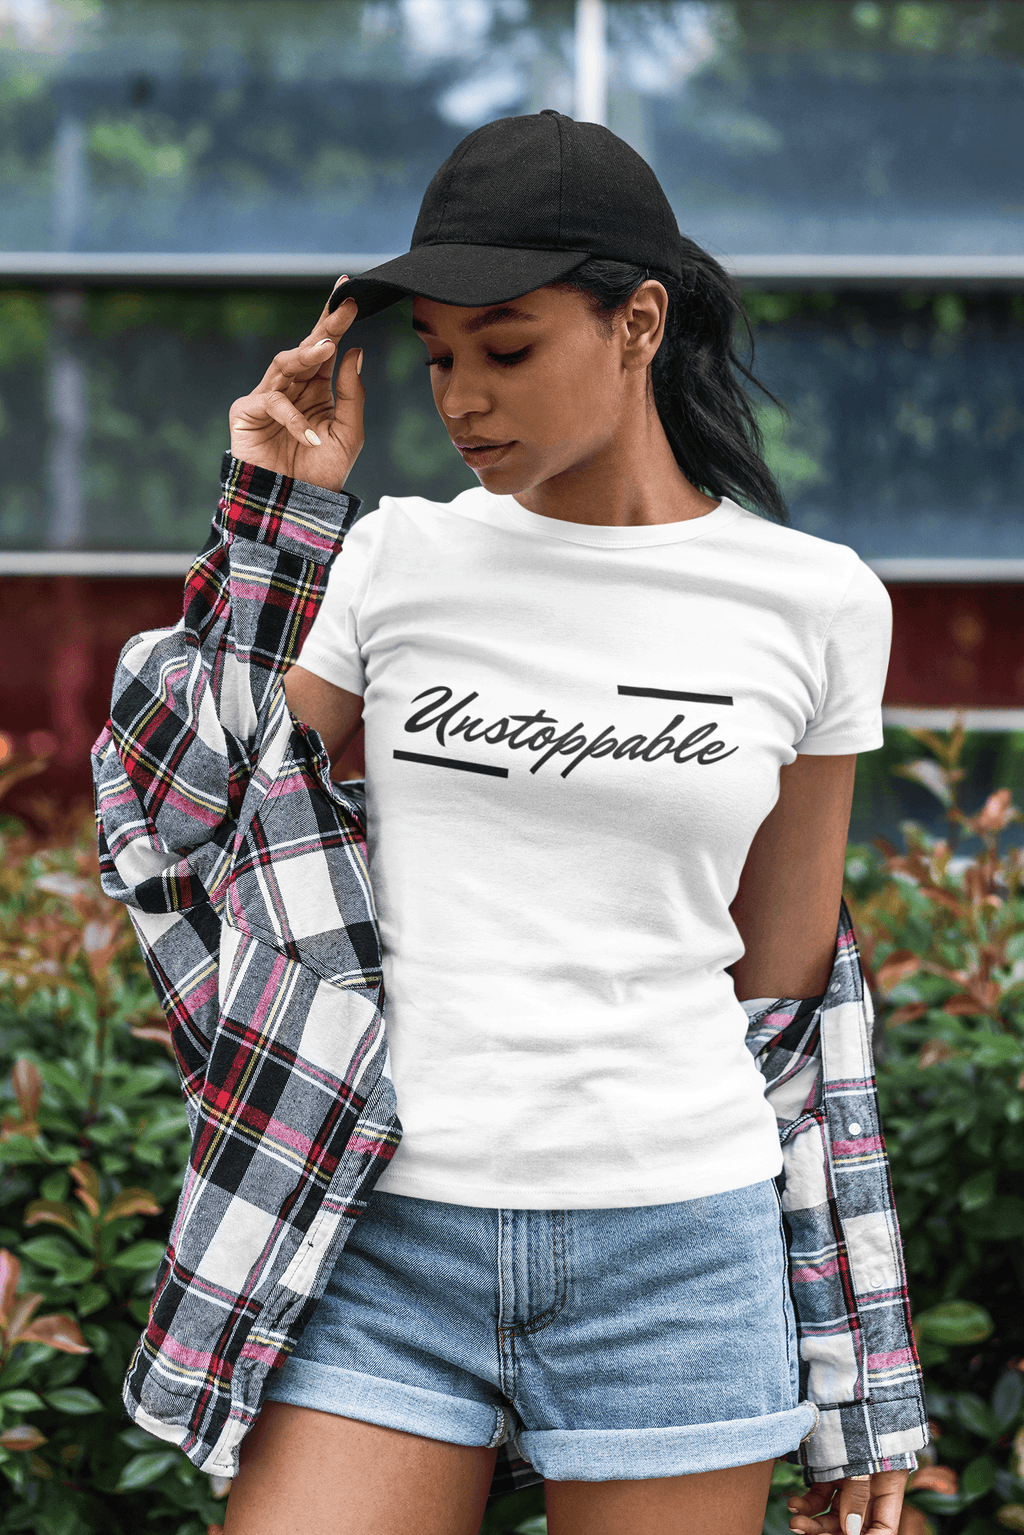 Unstoppable T-Shirt - Women Empowerment T-Shirts & Apparel | CP Designs Unlimited